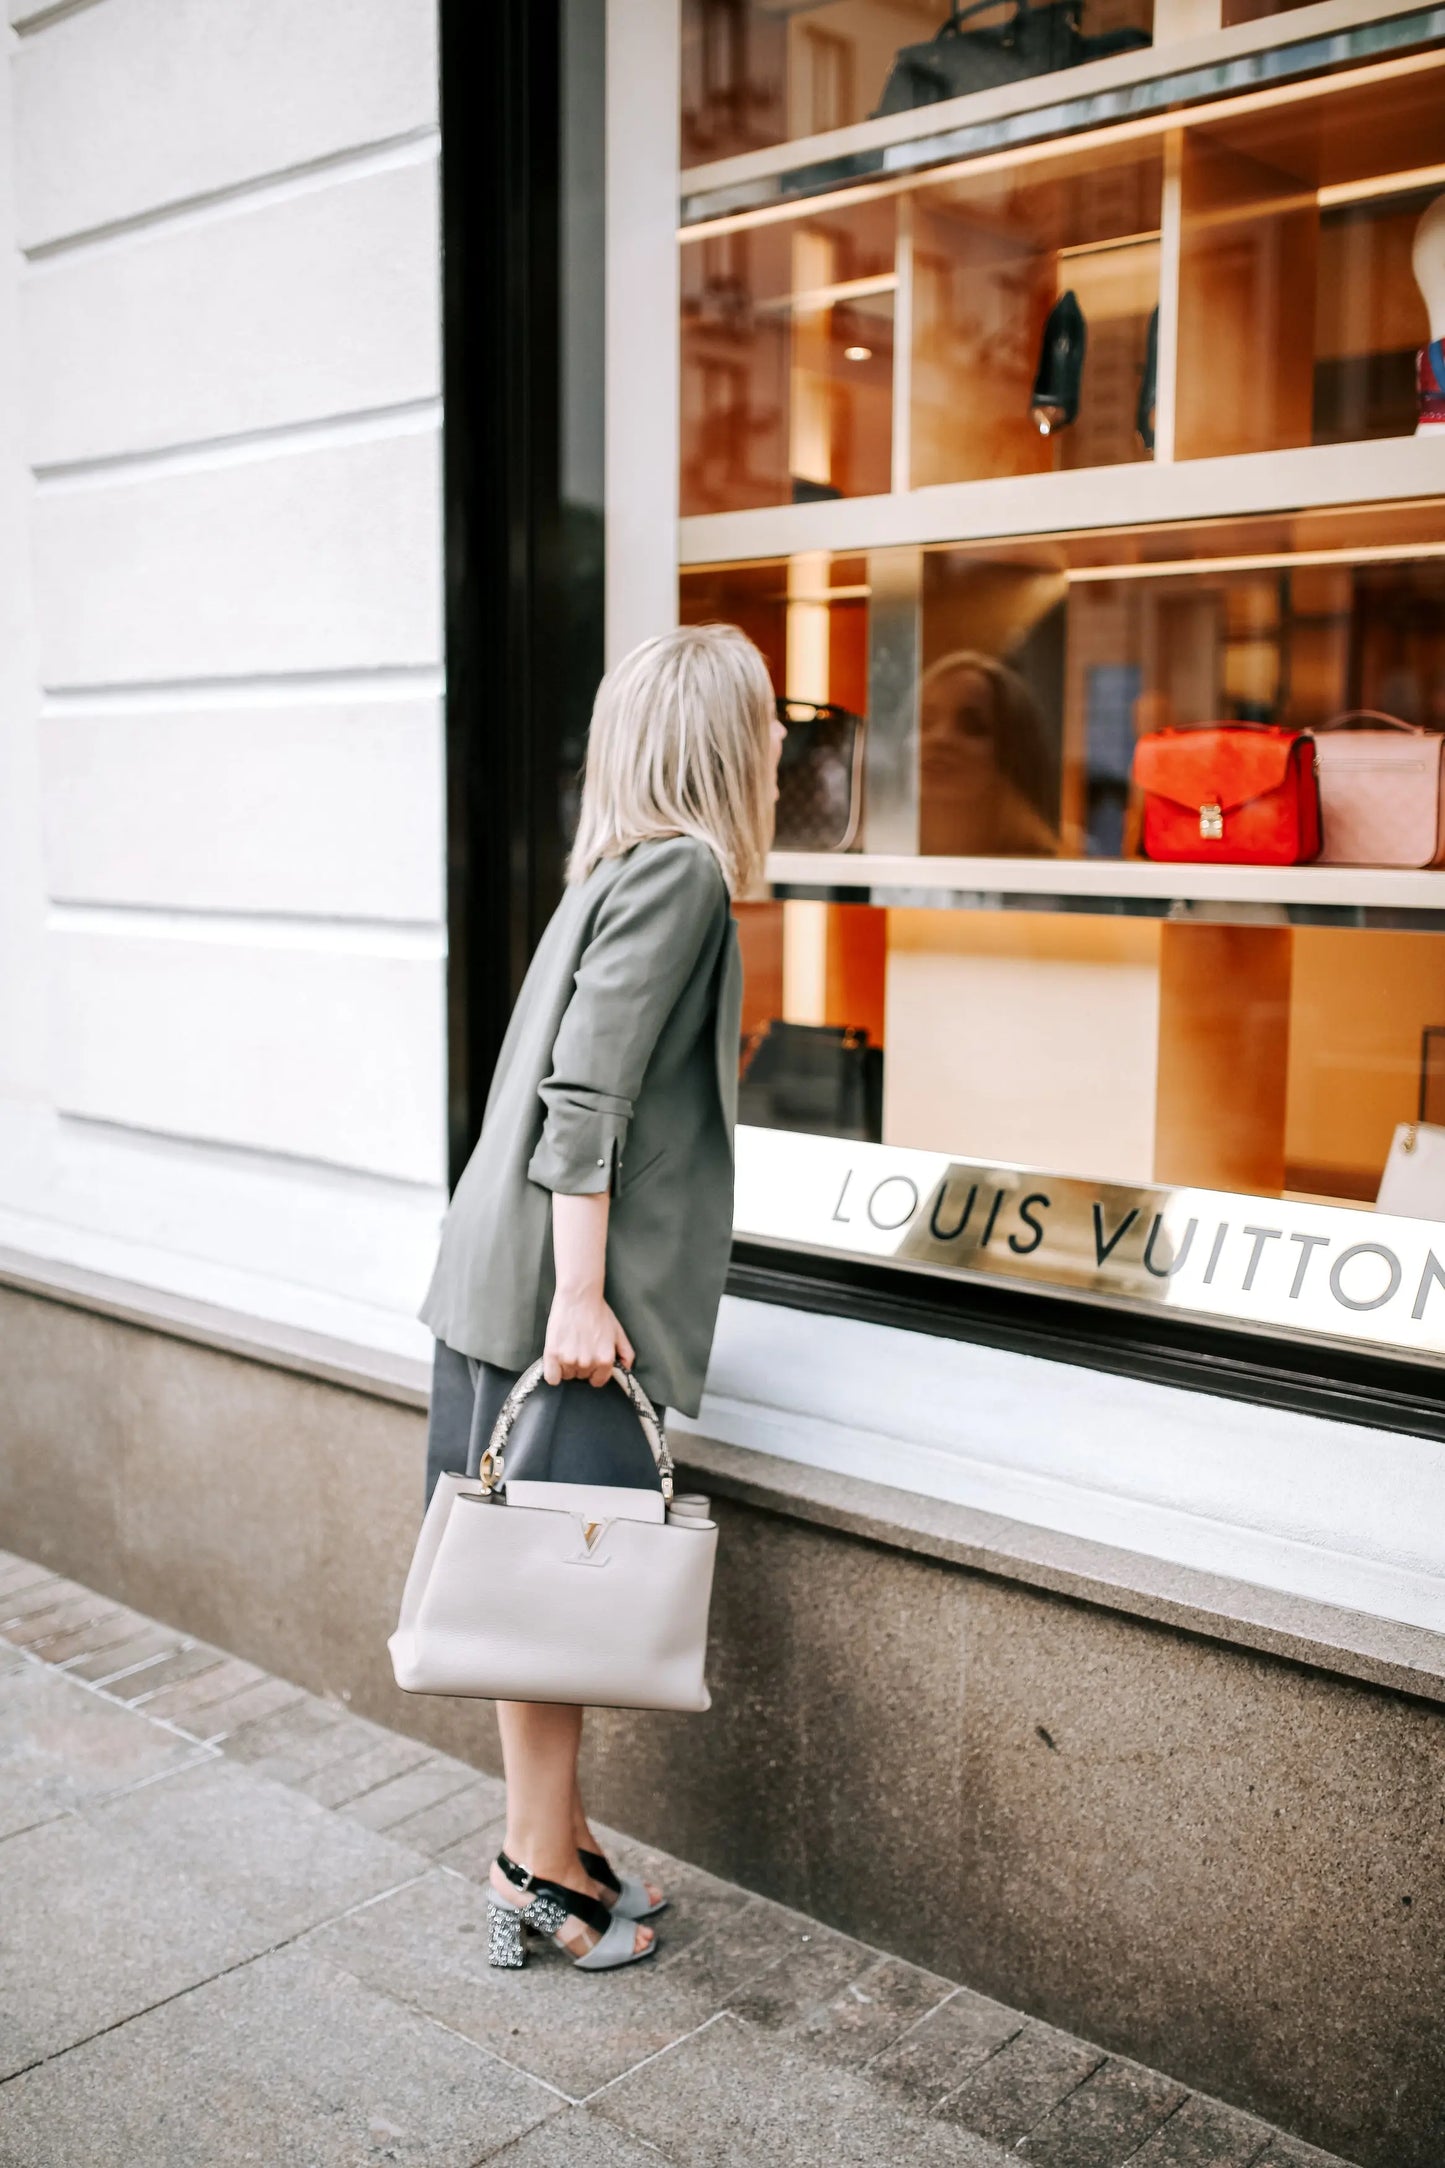 Are Louis Vuitton Bags Cheaper In Europe? (Jan 2023) – Bagaholic